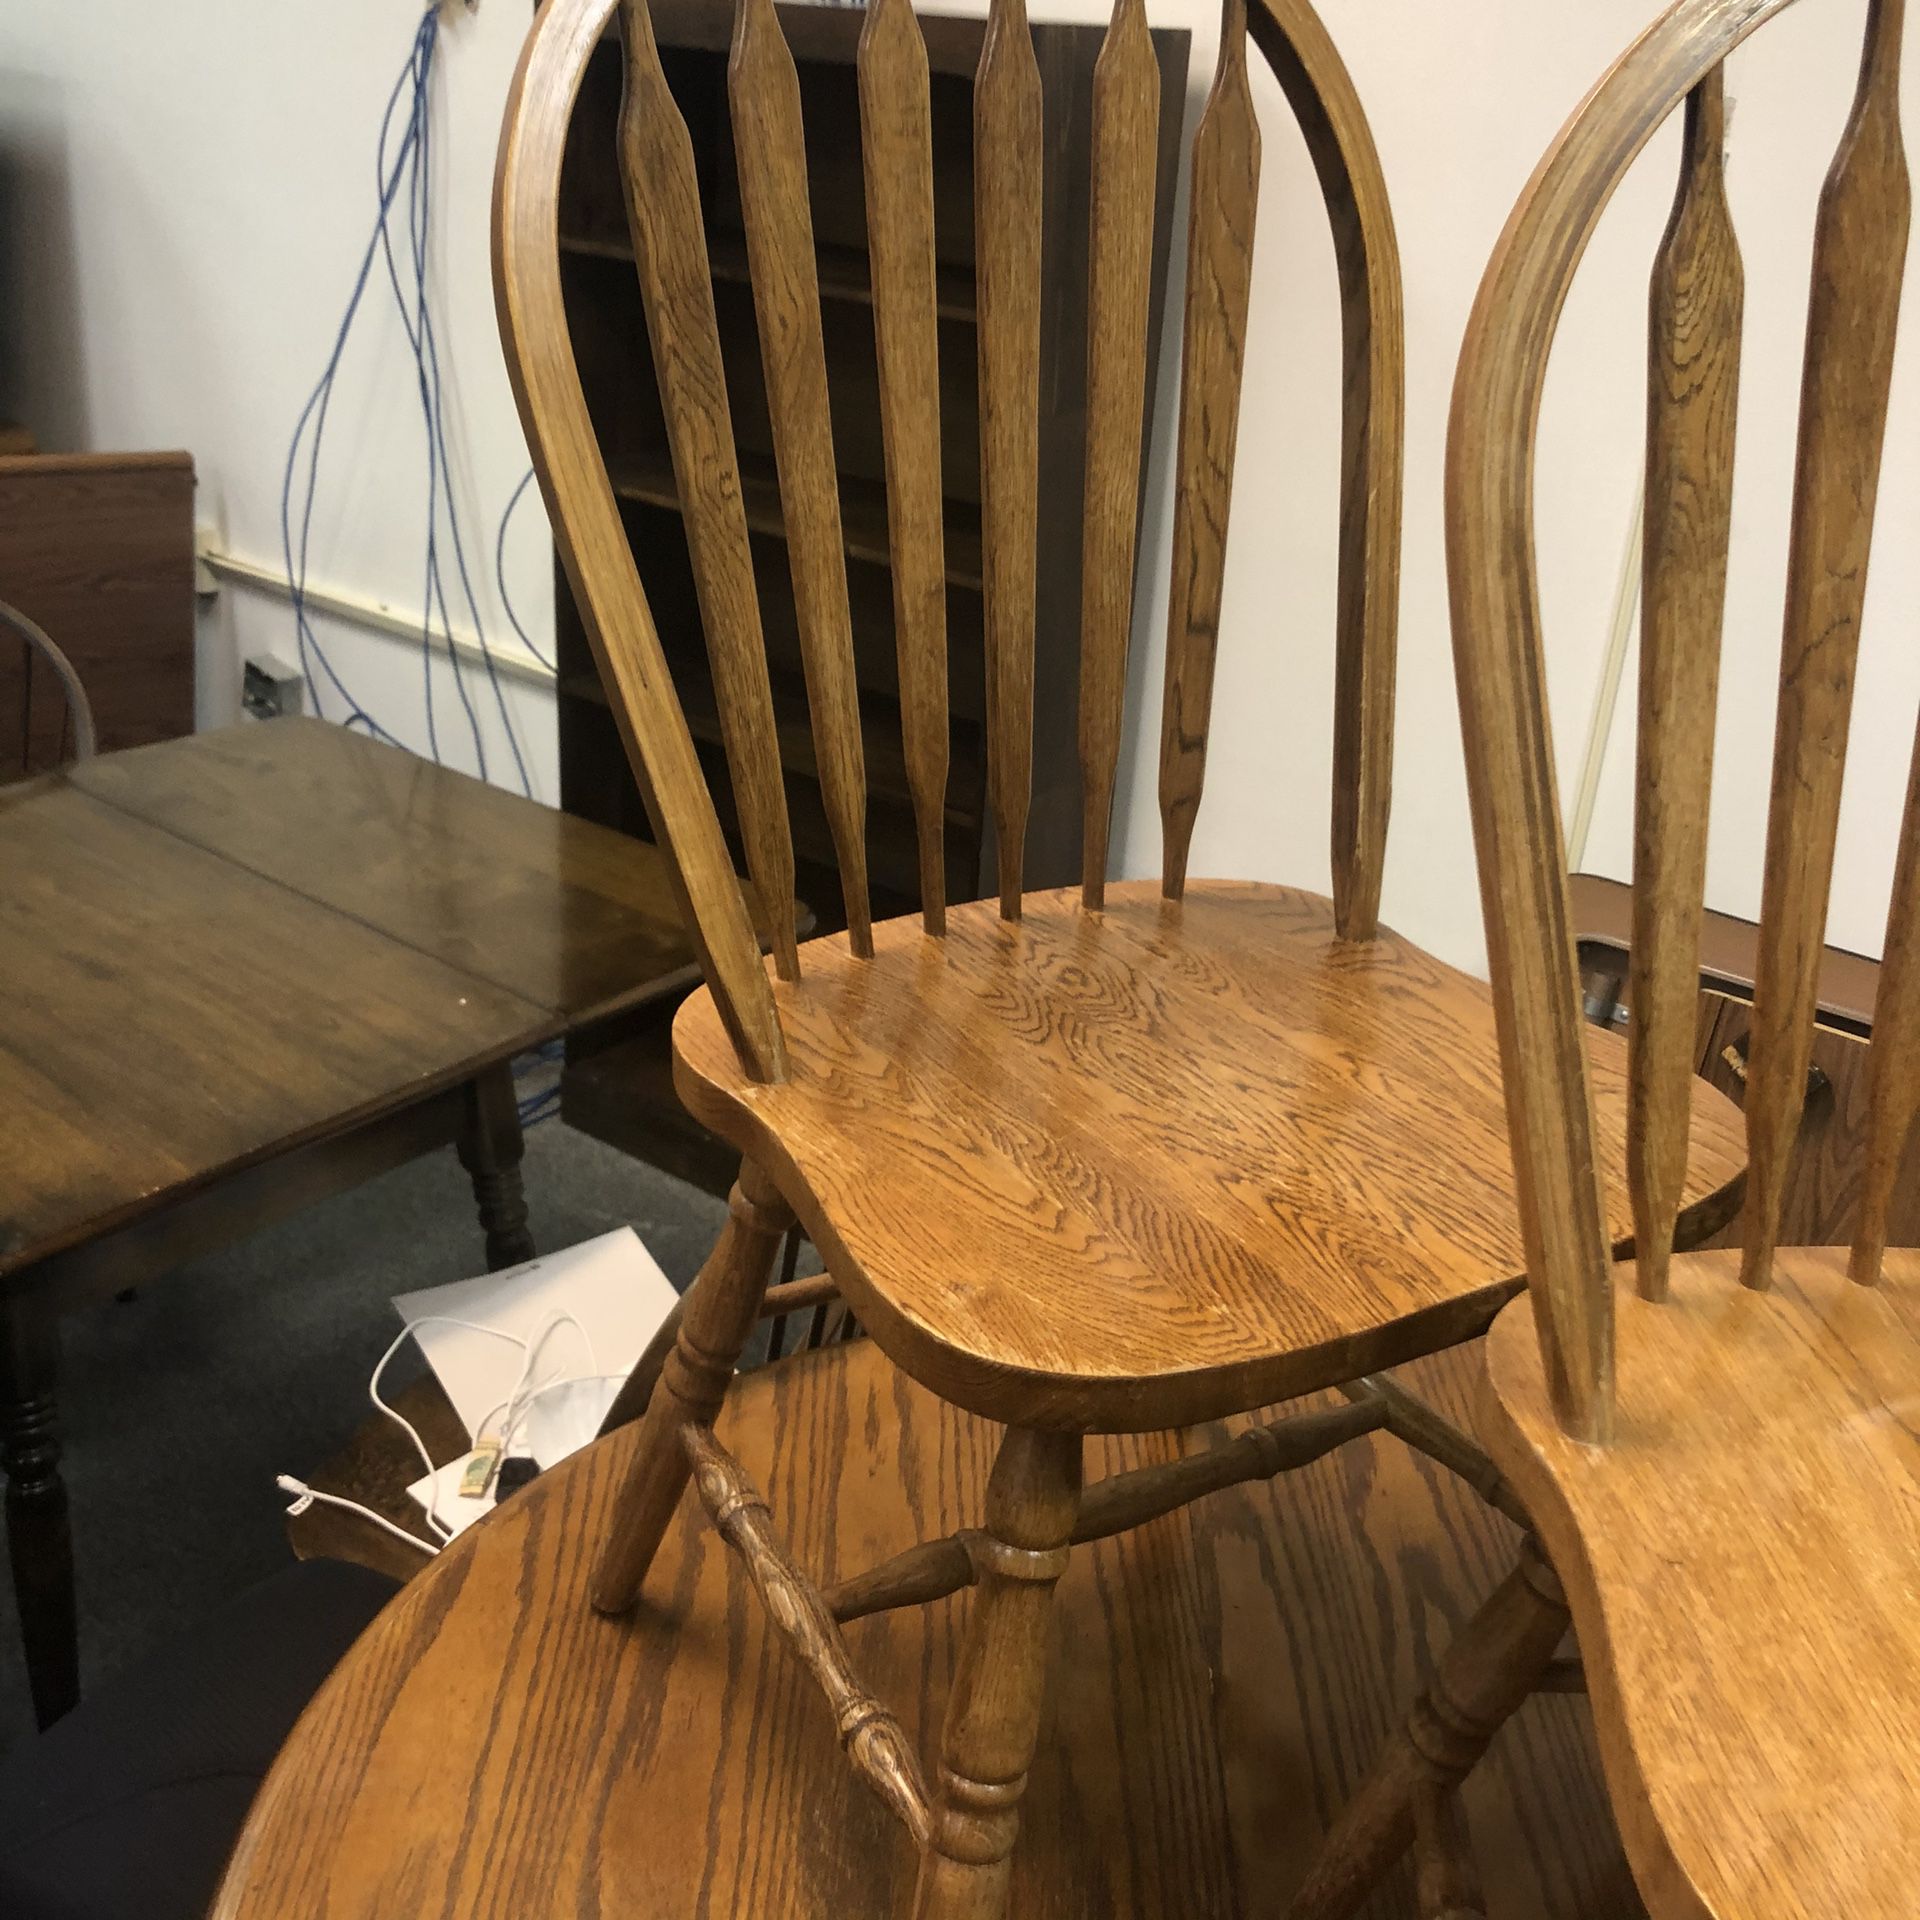 Vintage Solid Oak Table With Three Matching Chairs